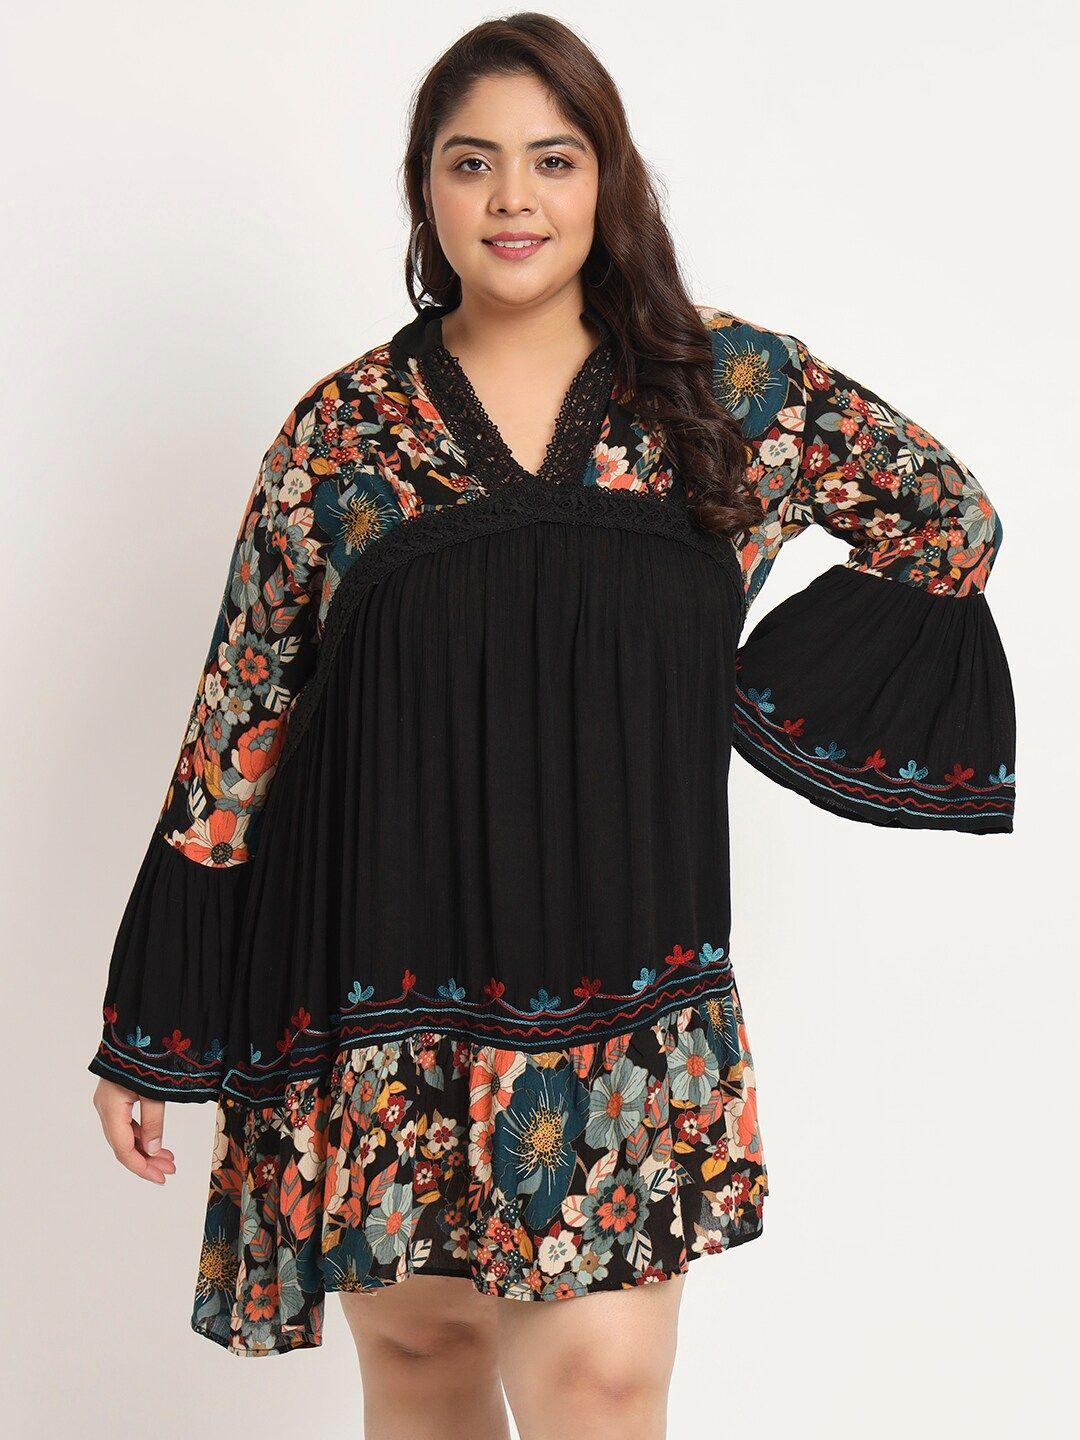 veldress plus size floral printed bell sleeves lace detail a-line dress